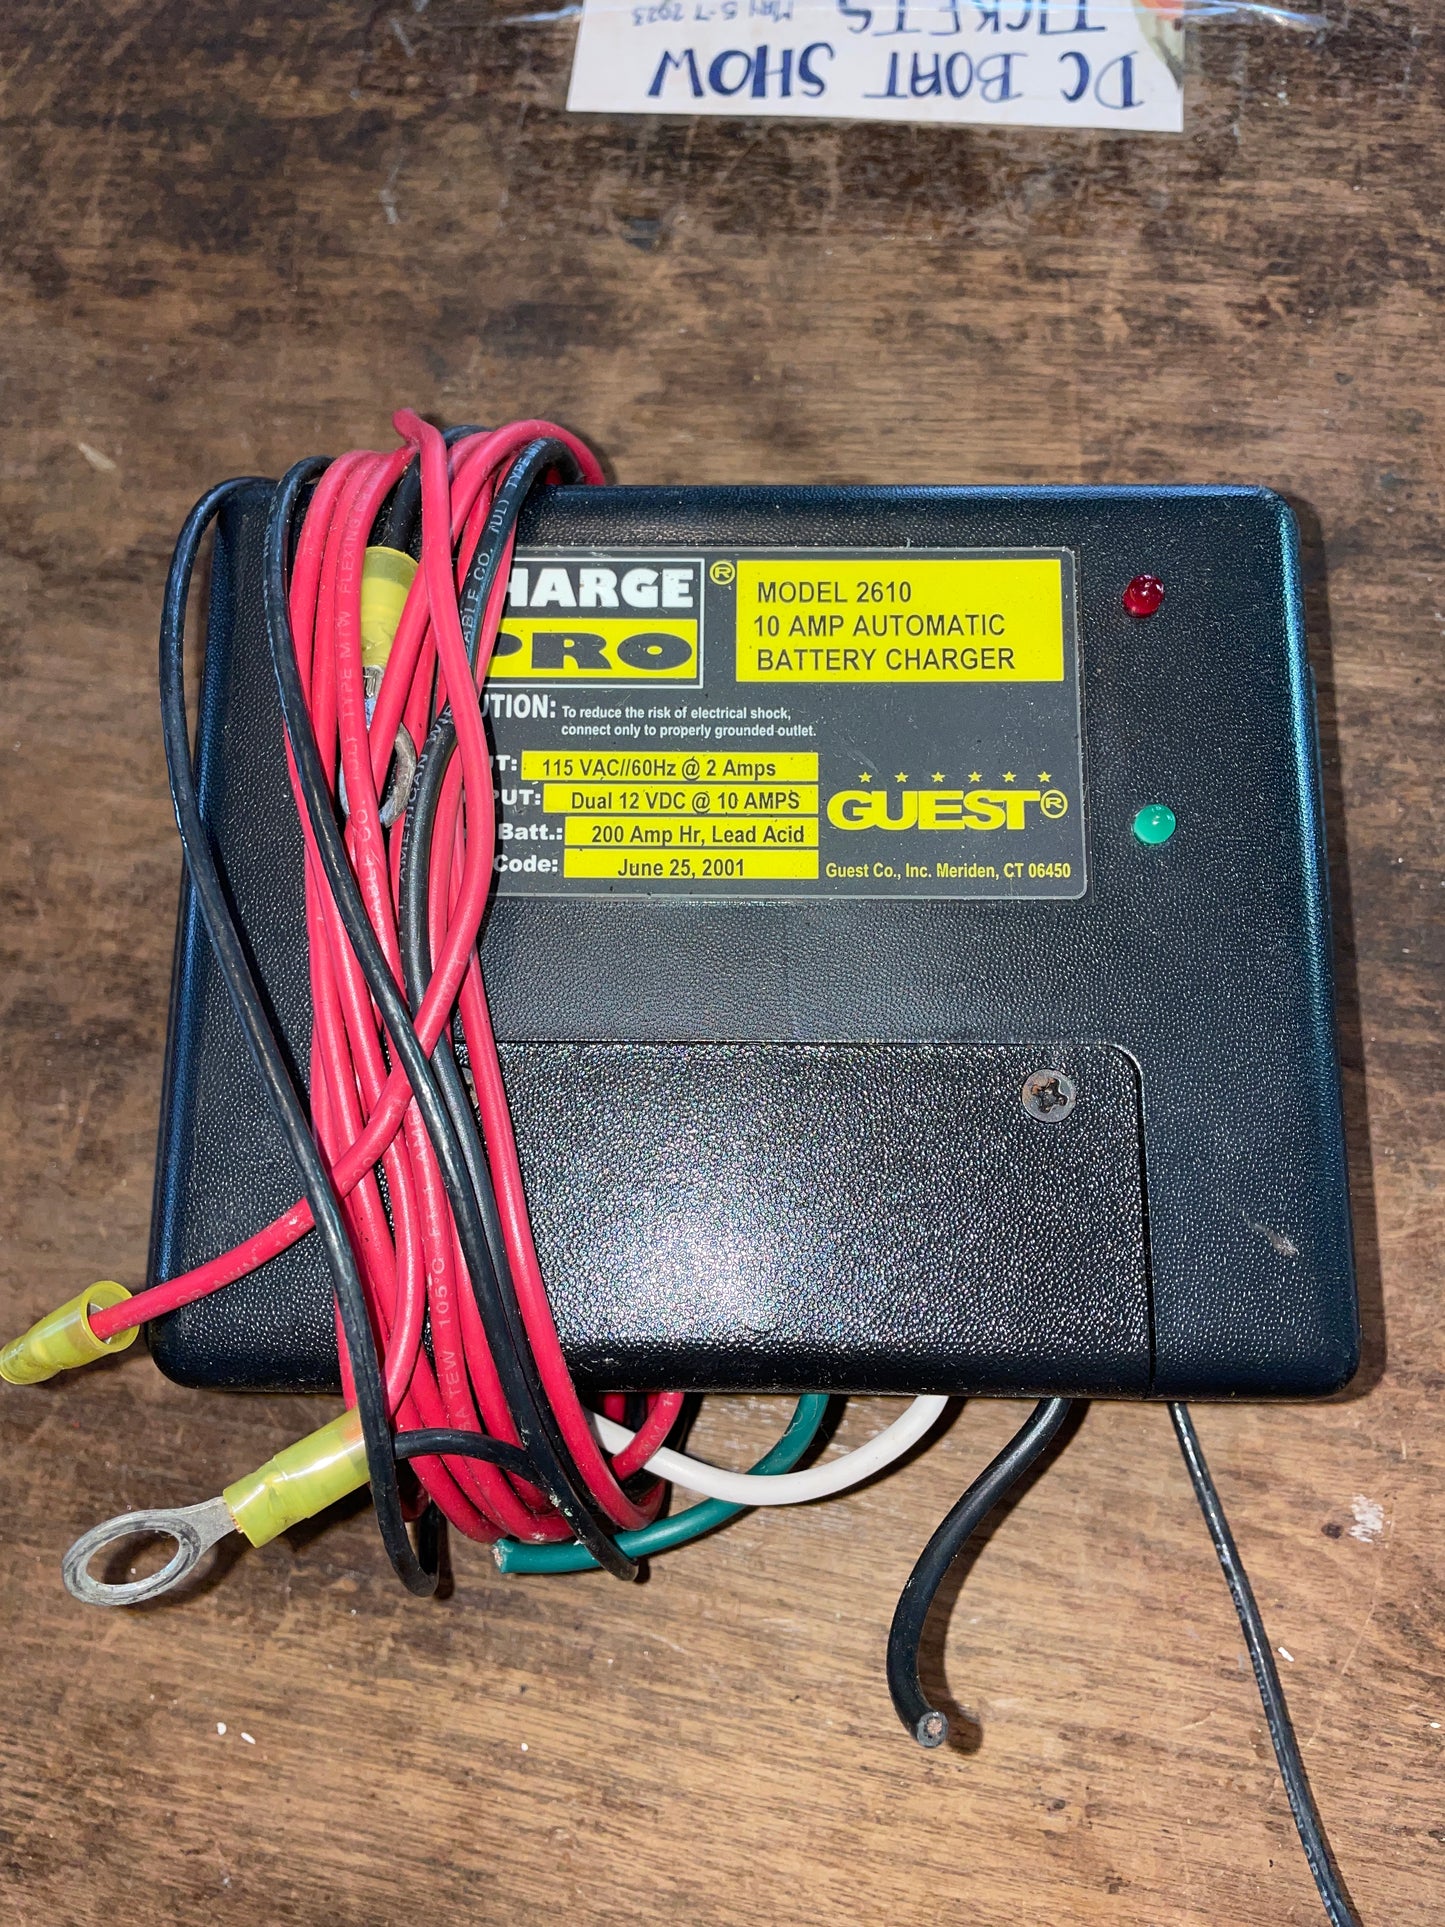 Guest Battery Charger (Charge Pro) Model # 2610- UNTESTED